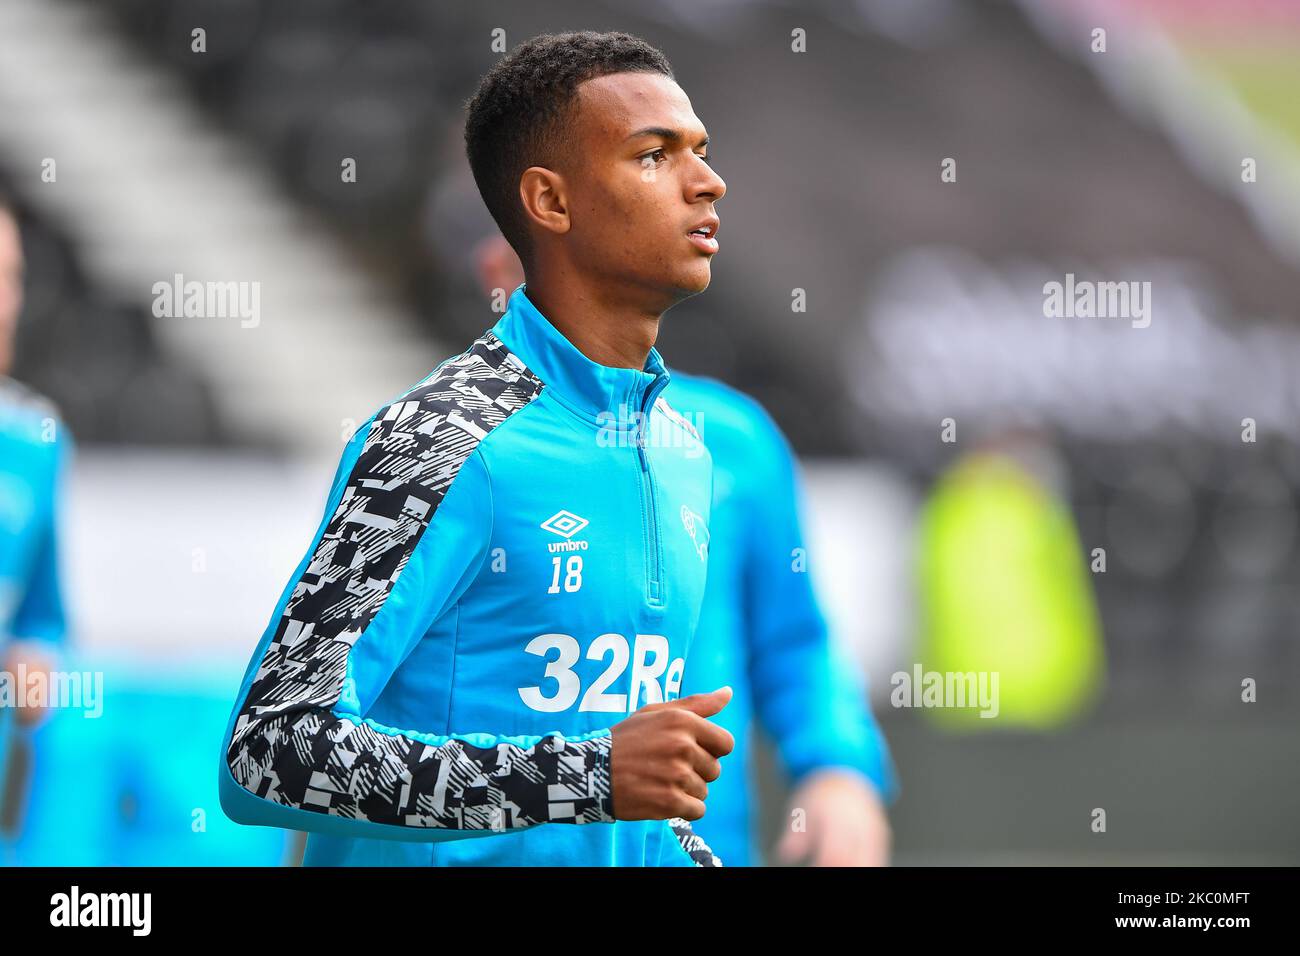 Morgan Whittaker of Derby County warms up ahead of kick-off during the Sky Bet Championship match between Derby County and Blackburn Rovers at the Pride Park, DerbyDerby, England on 26th September 2020. (Photo by Jon Hobley/MI News/NurPhoto) Stock Photo